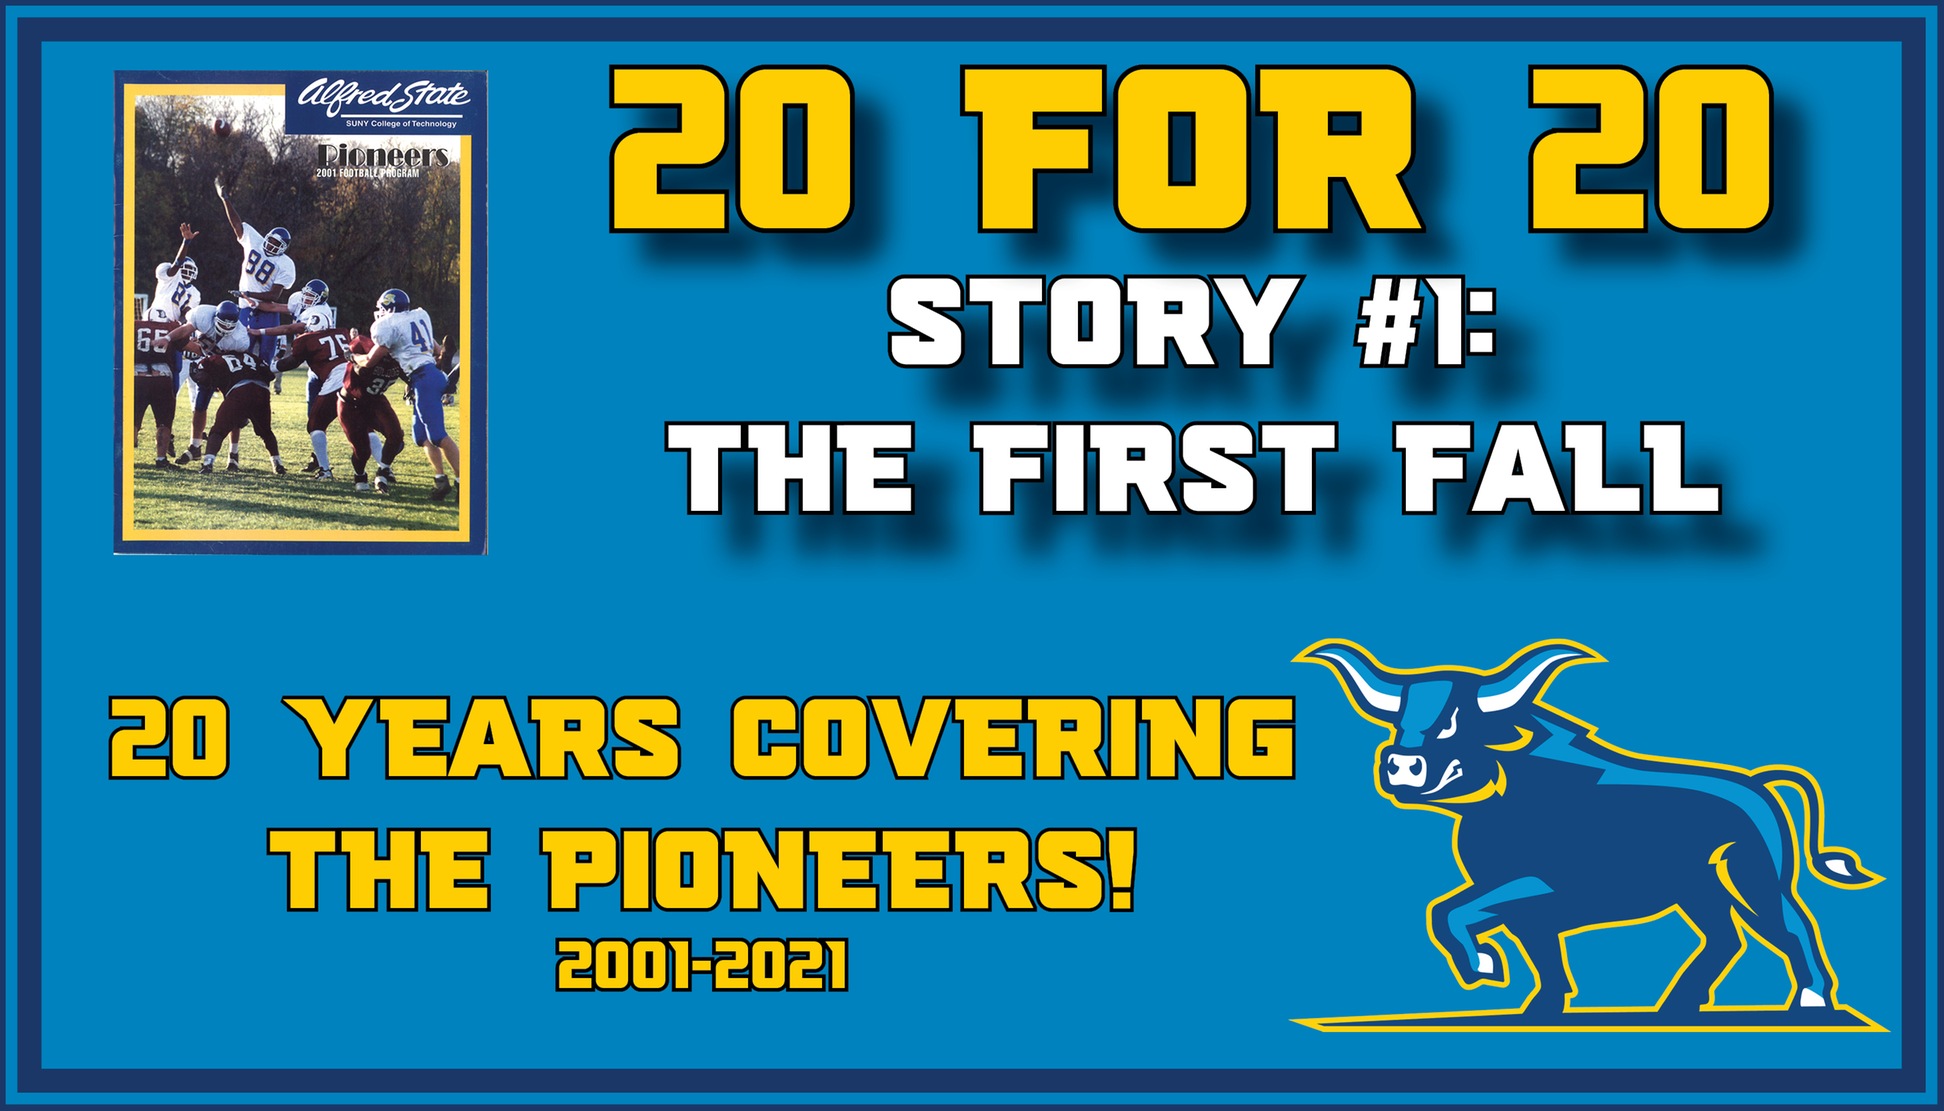 20 for 20 - Story #1 - The First Fall

picture features the cover of the 2001 Football Program